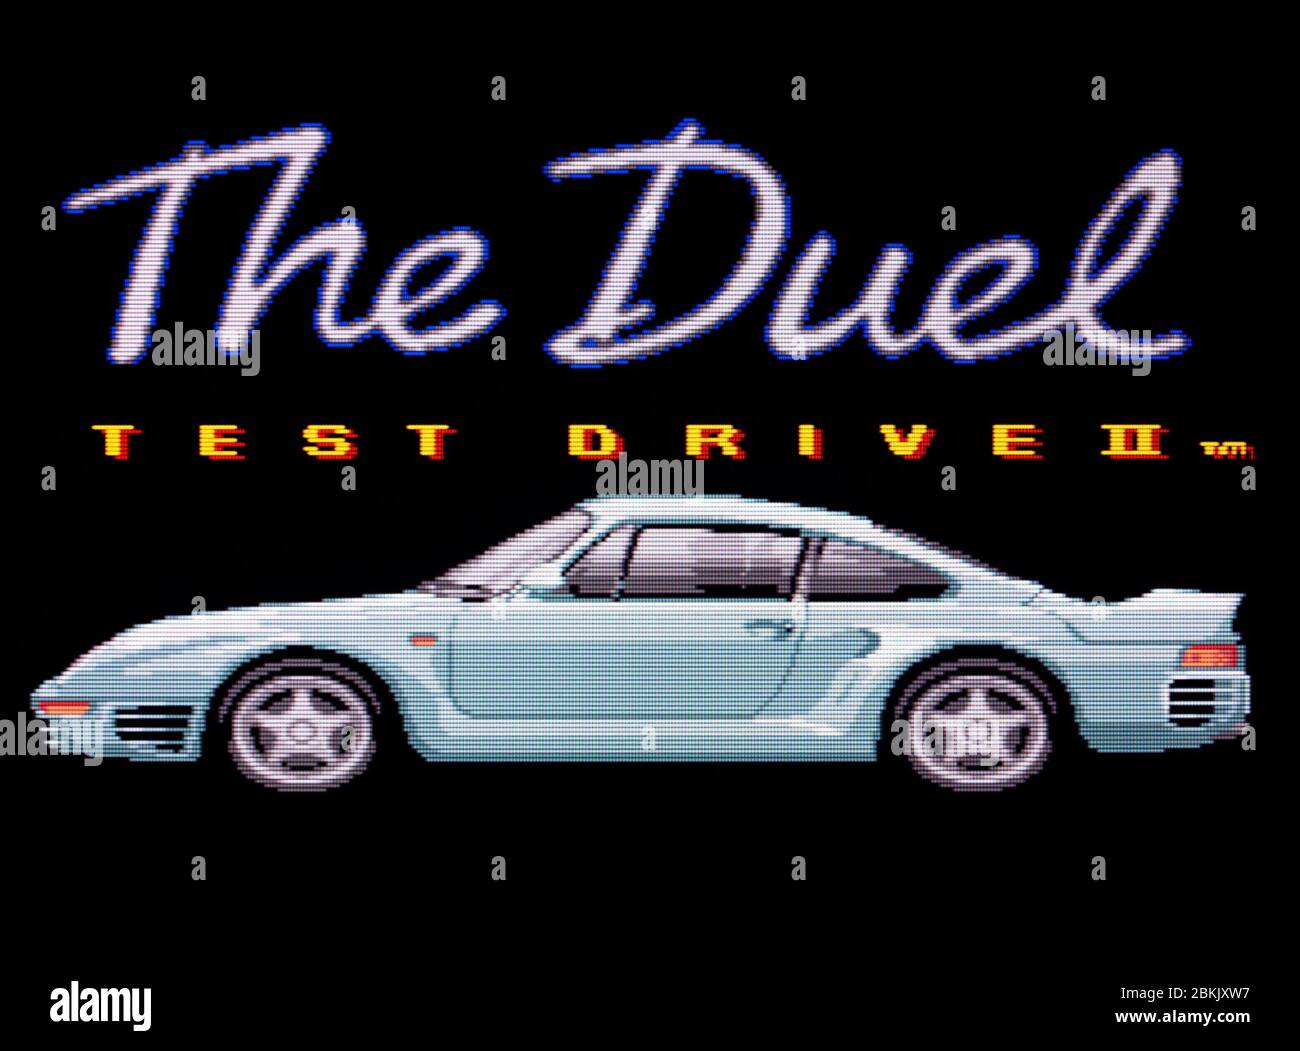 Test Drive The Duel - Sega Genesis Mega Drive - Editorial use only Stock Photo